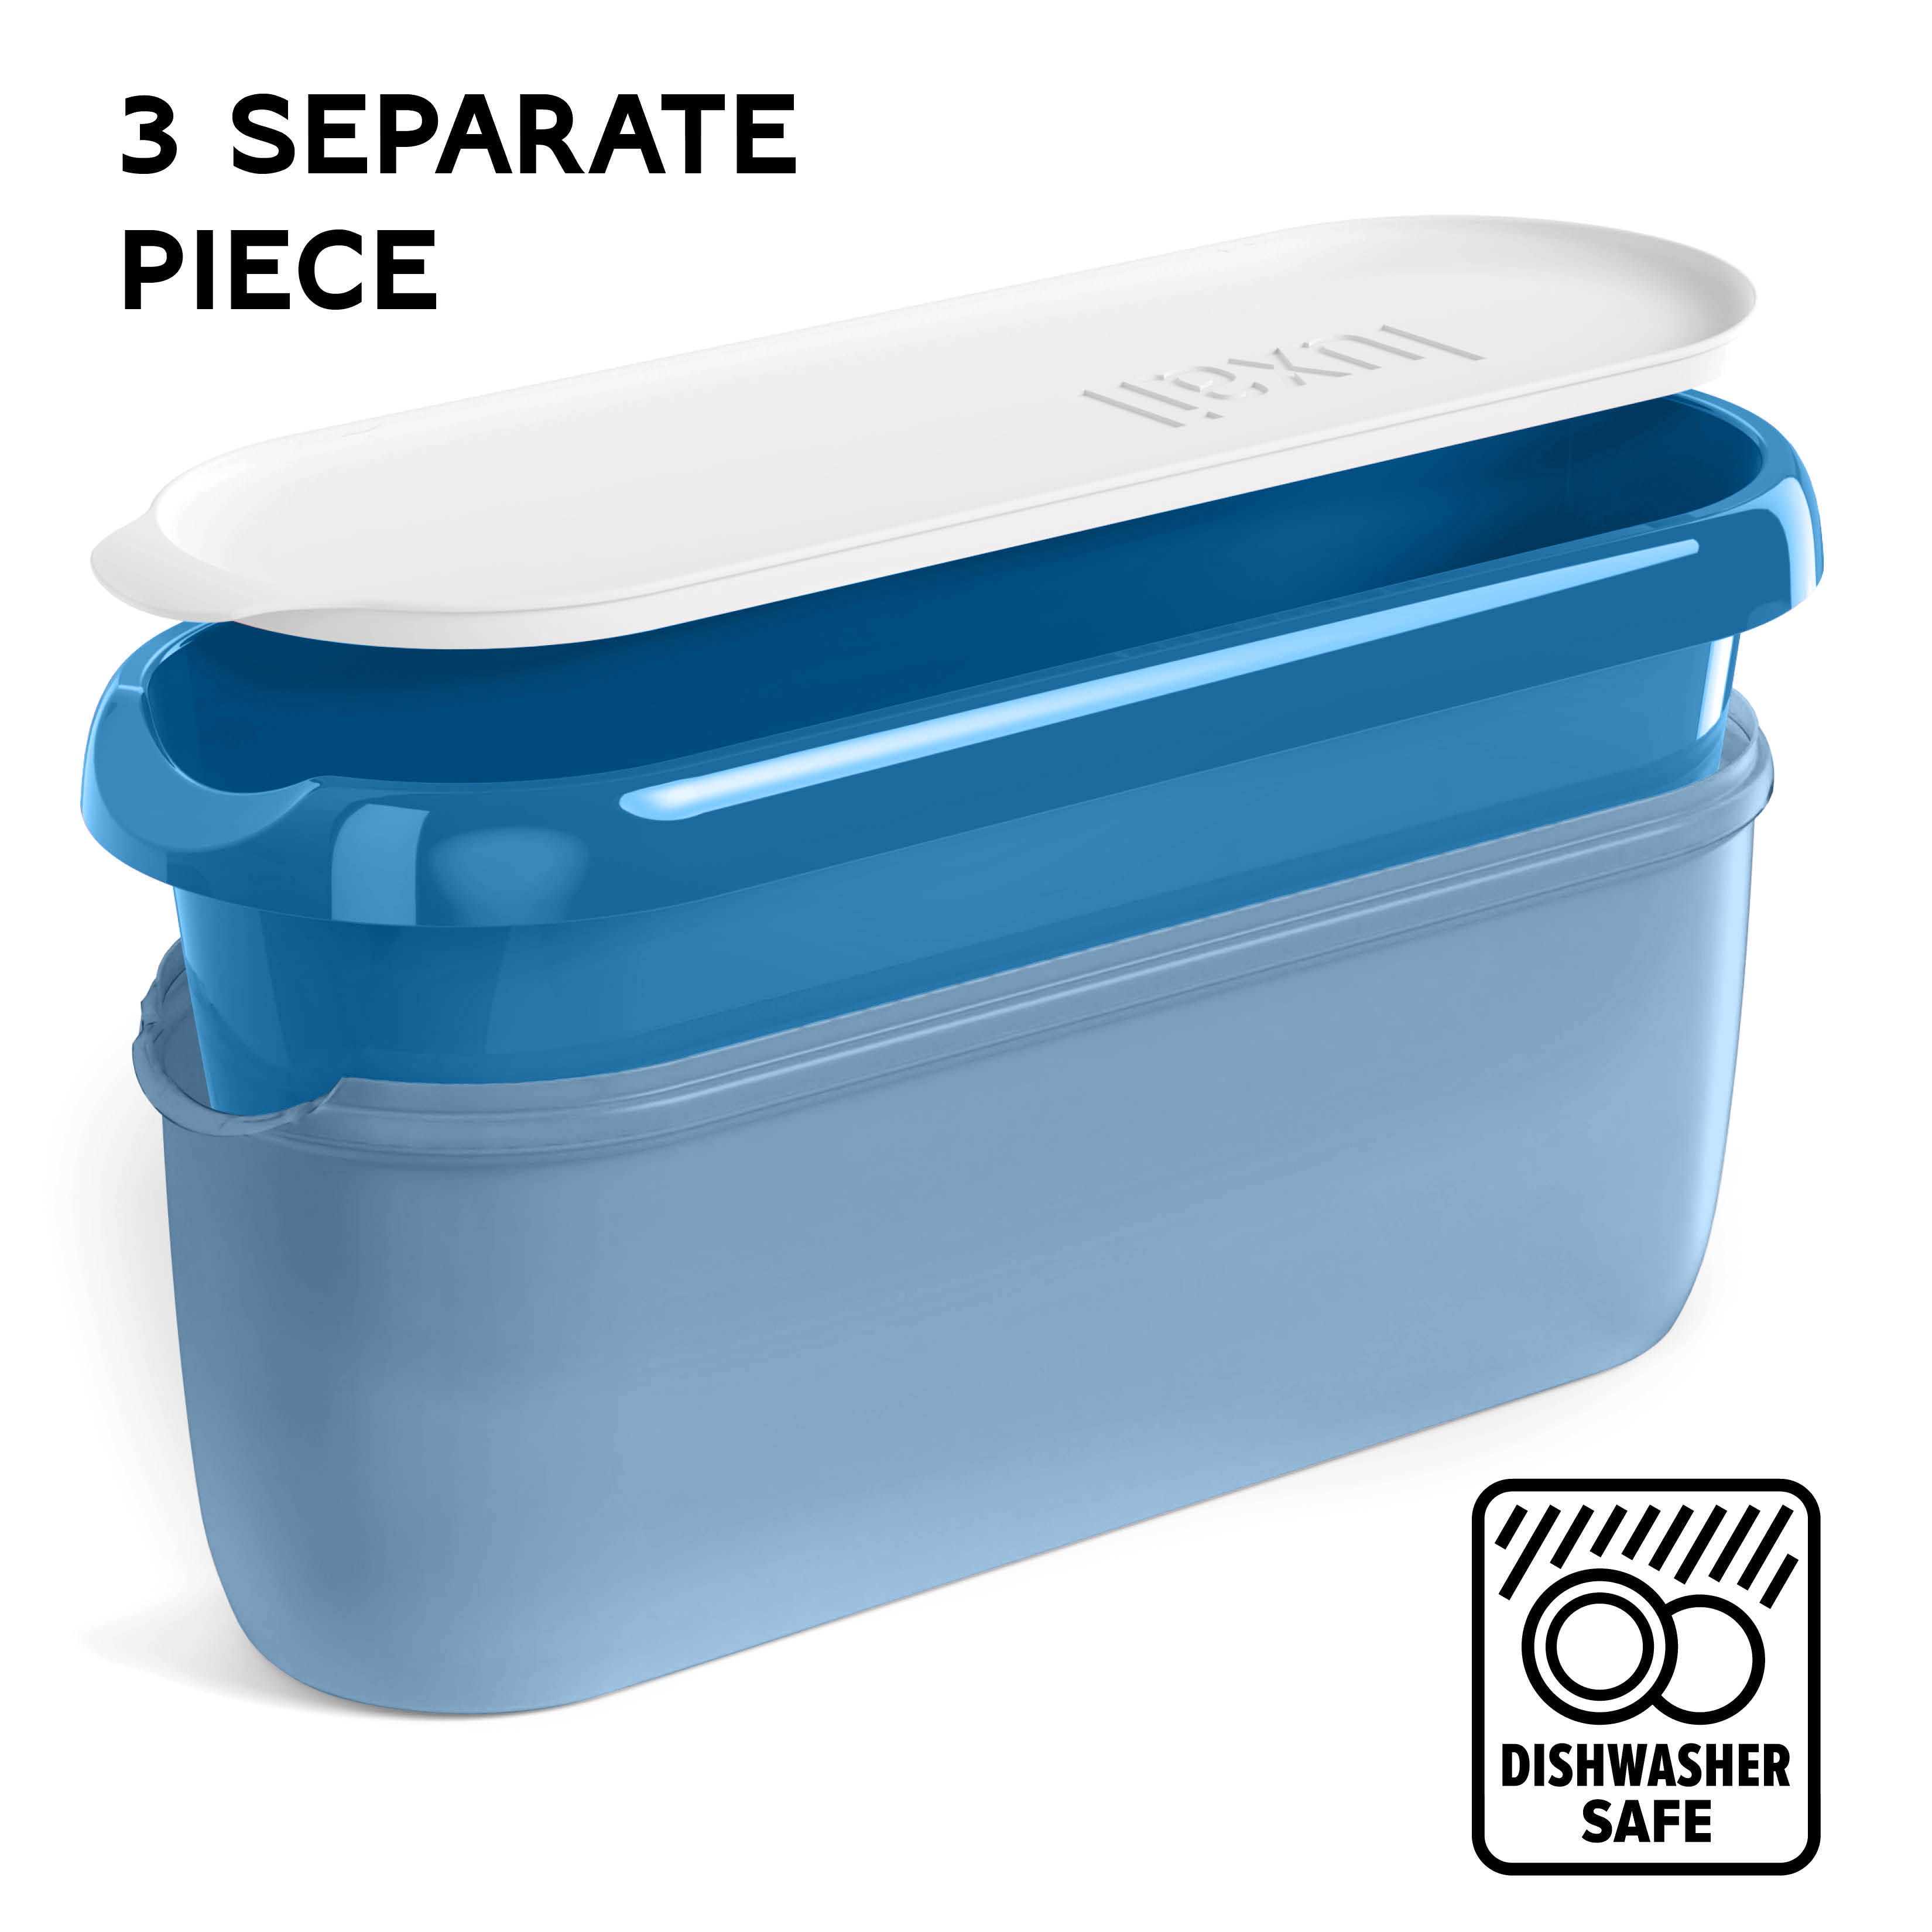 Check out this AMAZING double insulated Ice Cream container by